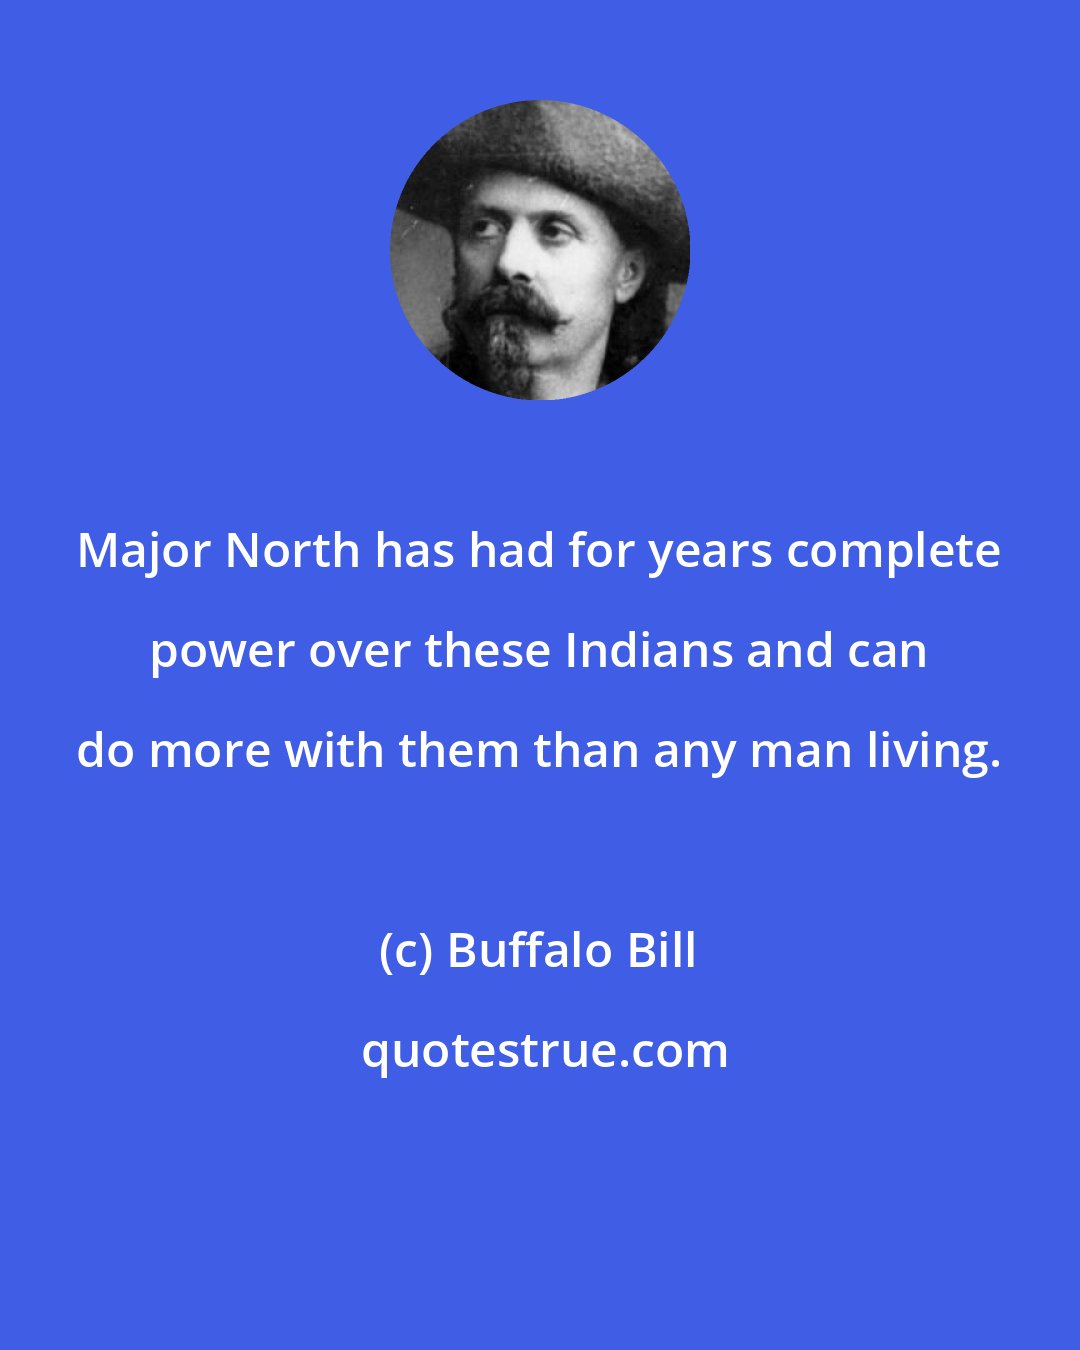 Buffalo Bill: Major North has had for years complete power over these Indians and can do more with them than any man living.